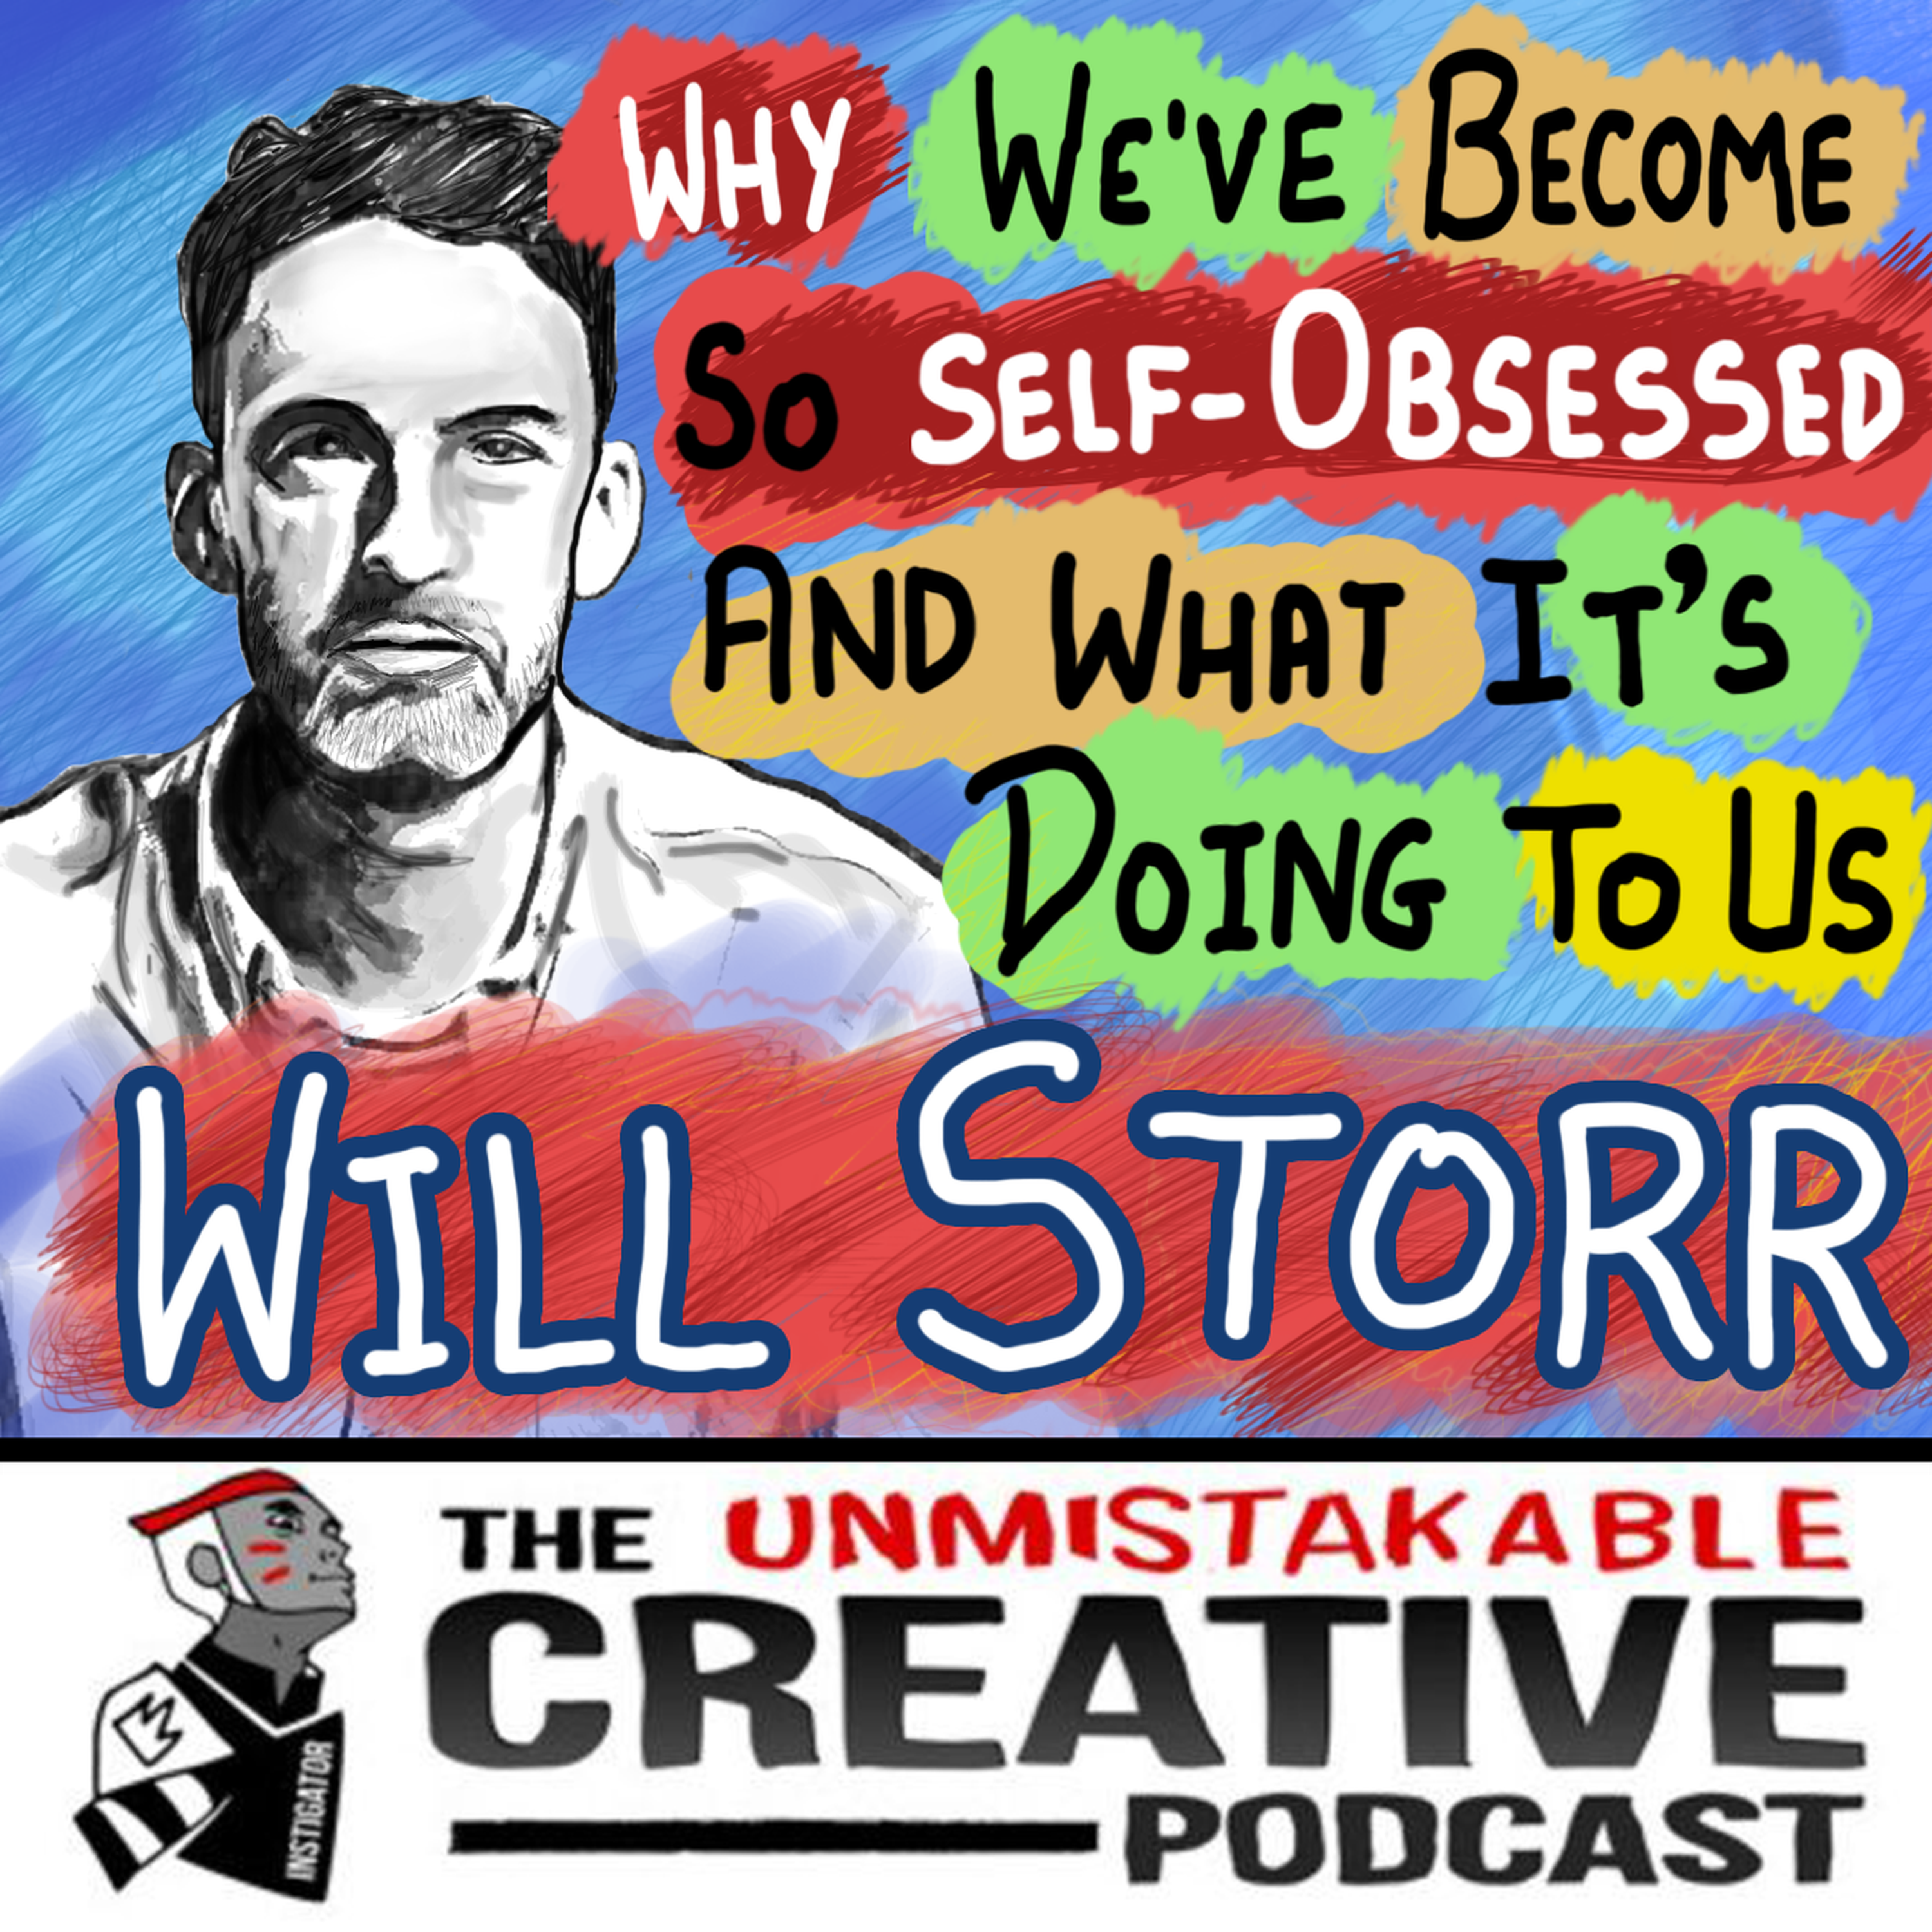 Why We’ve Become So Self-Obsessed and What It’s Doing to Us with Will Storr Image